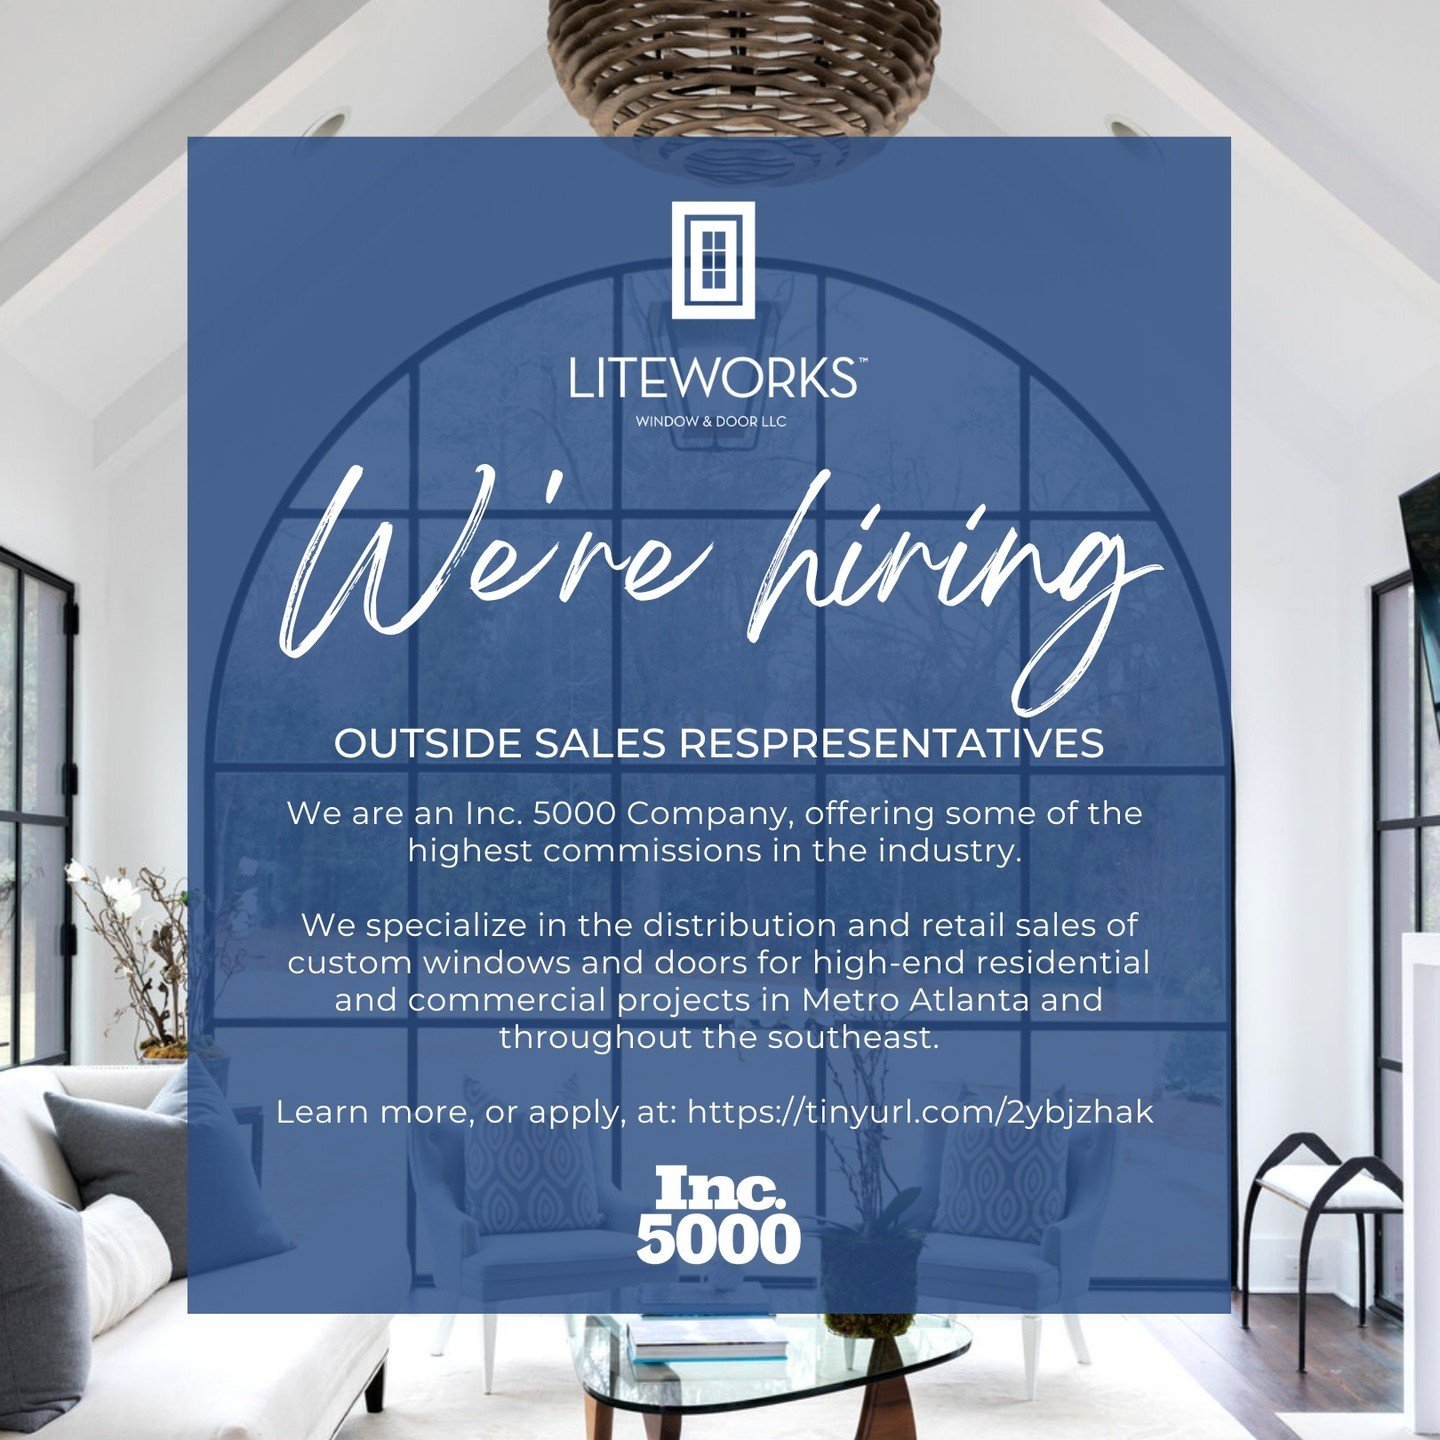 Liteworks Window and Door is looking for confident and outgoing individuals to join our team as Outside Sales Representatives. Follow the link below to learn more and apply!

https://tinyurl.com/2ybjzhak

#Hiring #BestPlacesToWork #Inc5000 #Liteworks